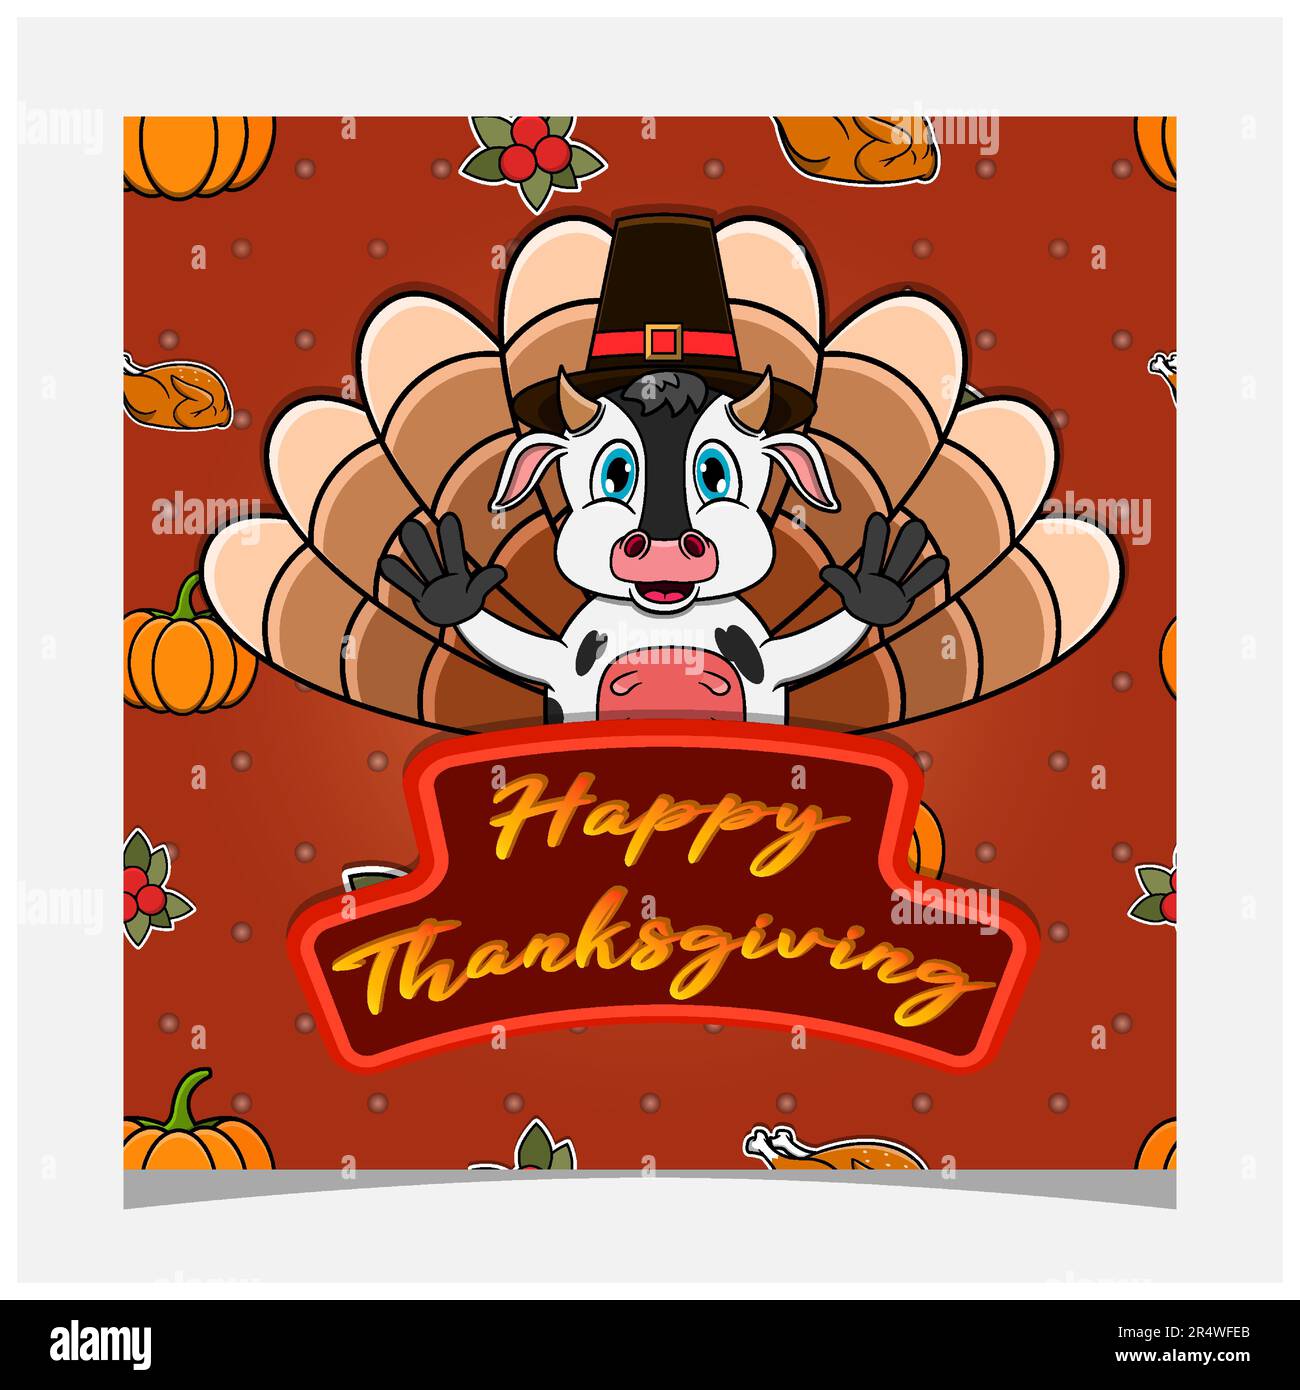 Happy Thanksgiving Card With Cute Cow Character Design. Greeting Card, Poster, Flyer and Invitation. Vector and Illustration. Stock Vector